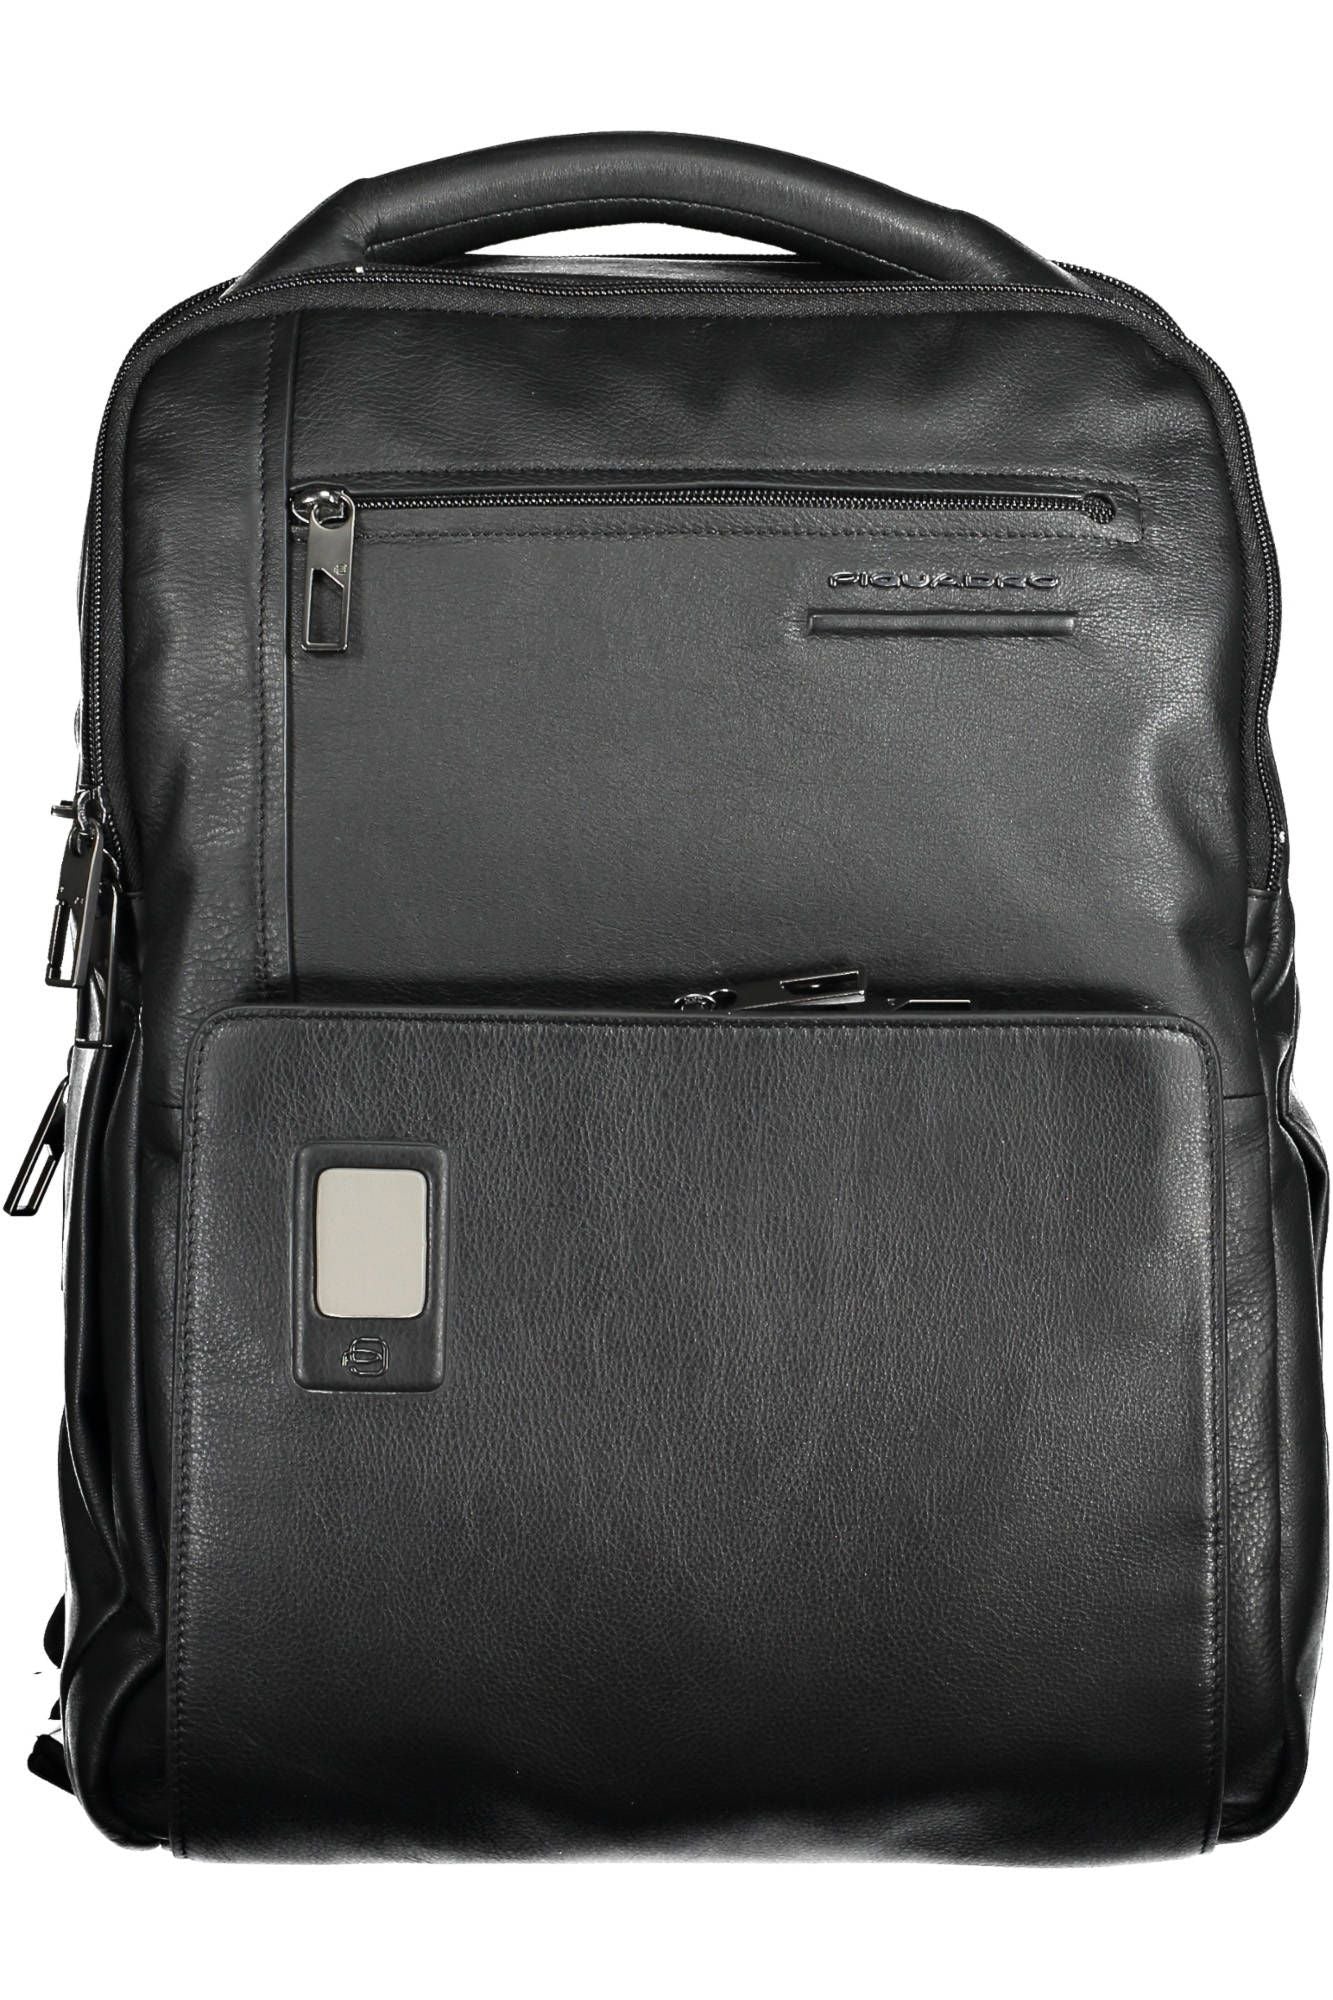 Elegant Leather Backpack with Secure Lock Feature